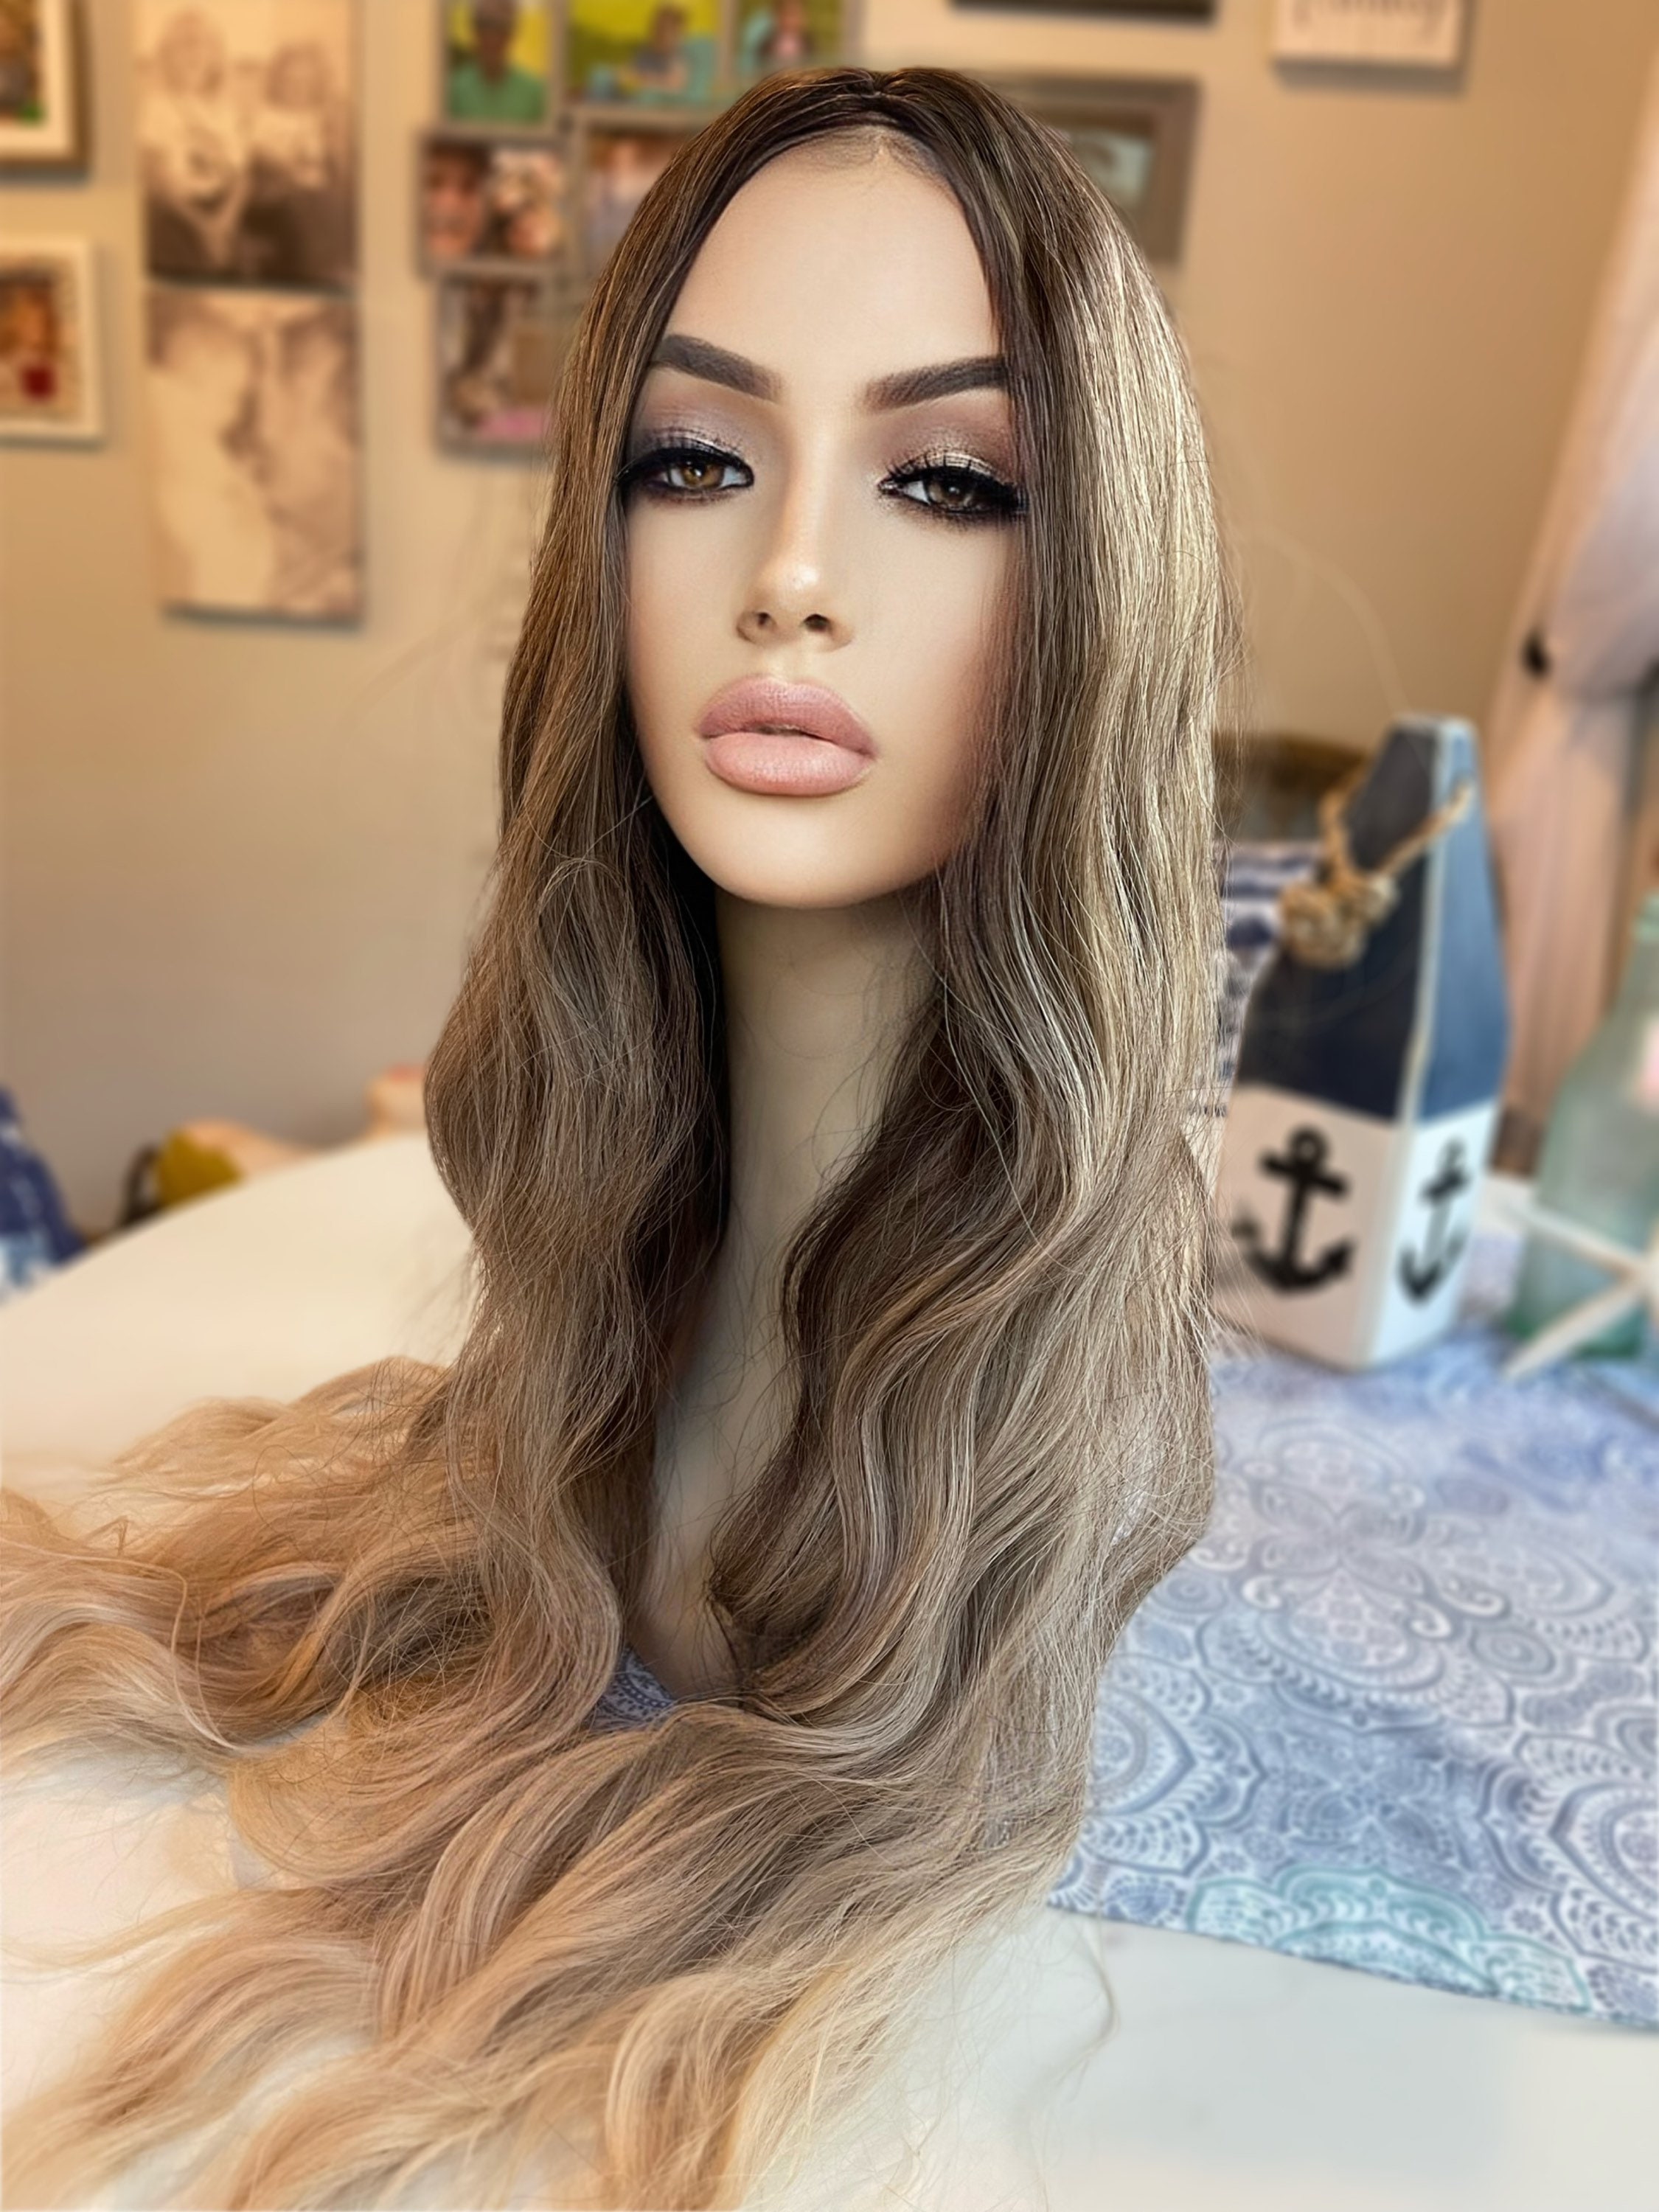 Colored Hair Extensions, Multi-colors Party Highlights Clip In Synthetic  Hair Mannequin for Wigs Braid Stand for Hair Braiding Mannequin Heads with  Hair under 10 Silky Straight Hair Products Doll Head 